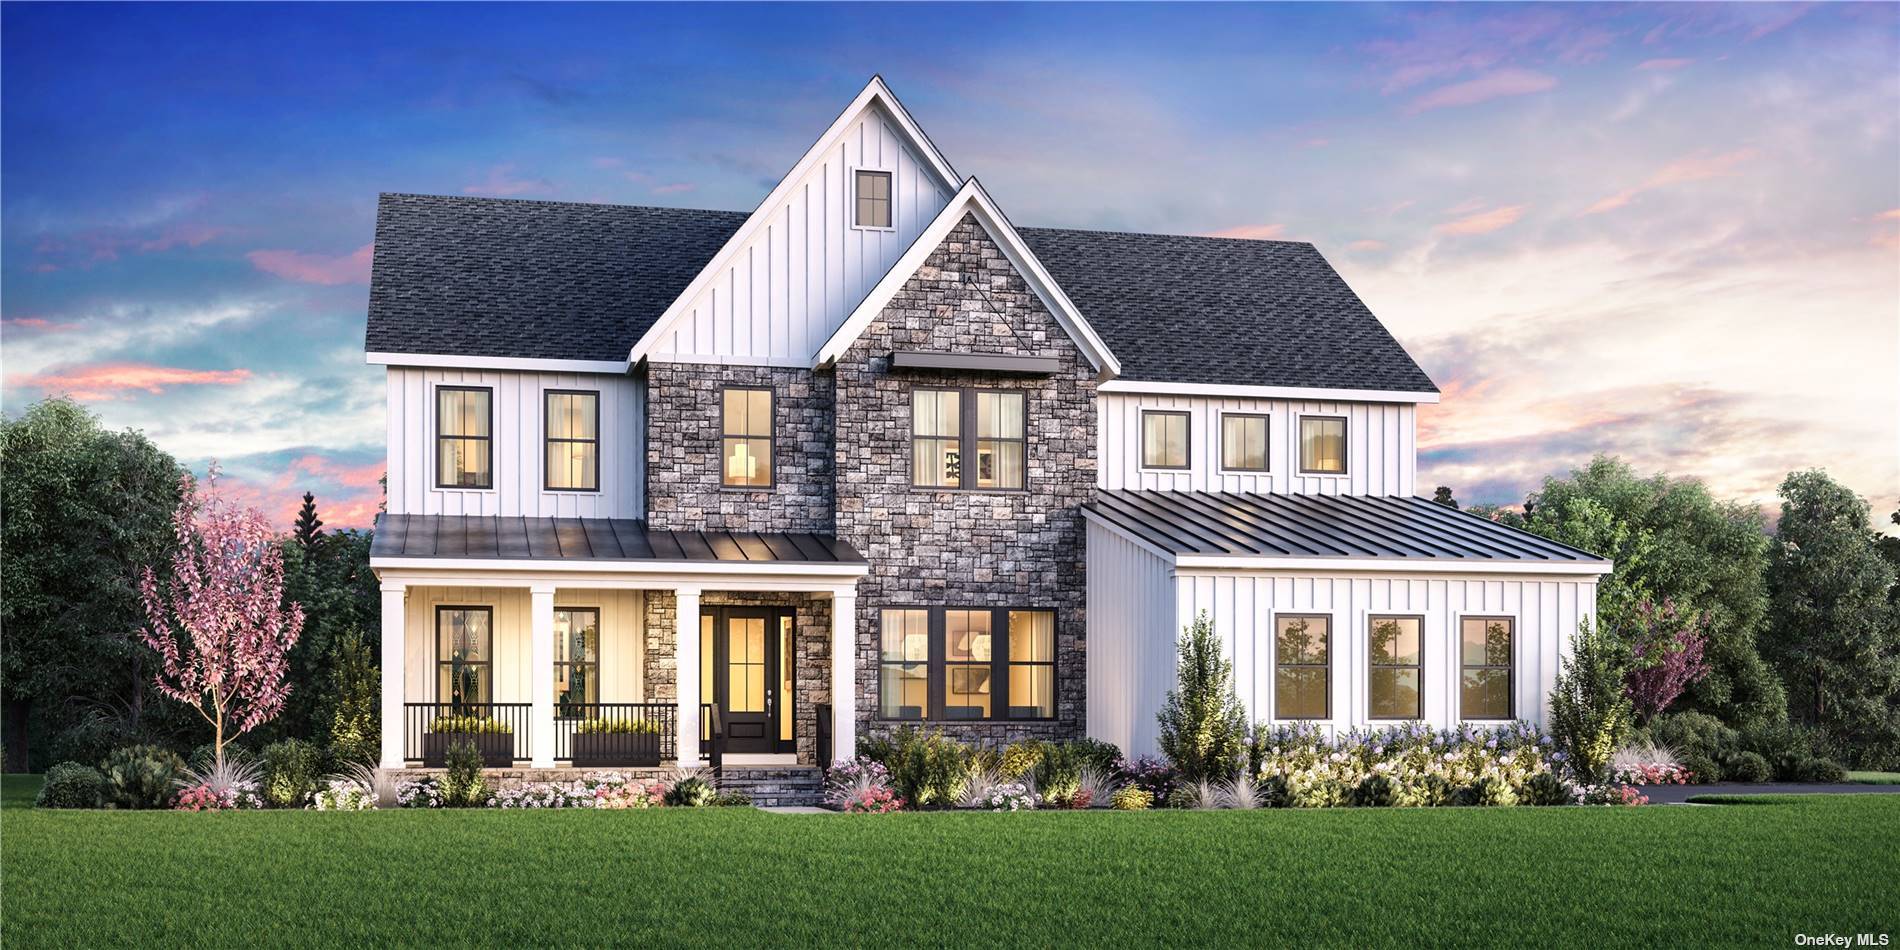 This beautiful Cortlandt Modern Farmhouse model home was perfectly crafted to fit your lifestyle and is being built with Designer Features.